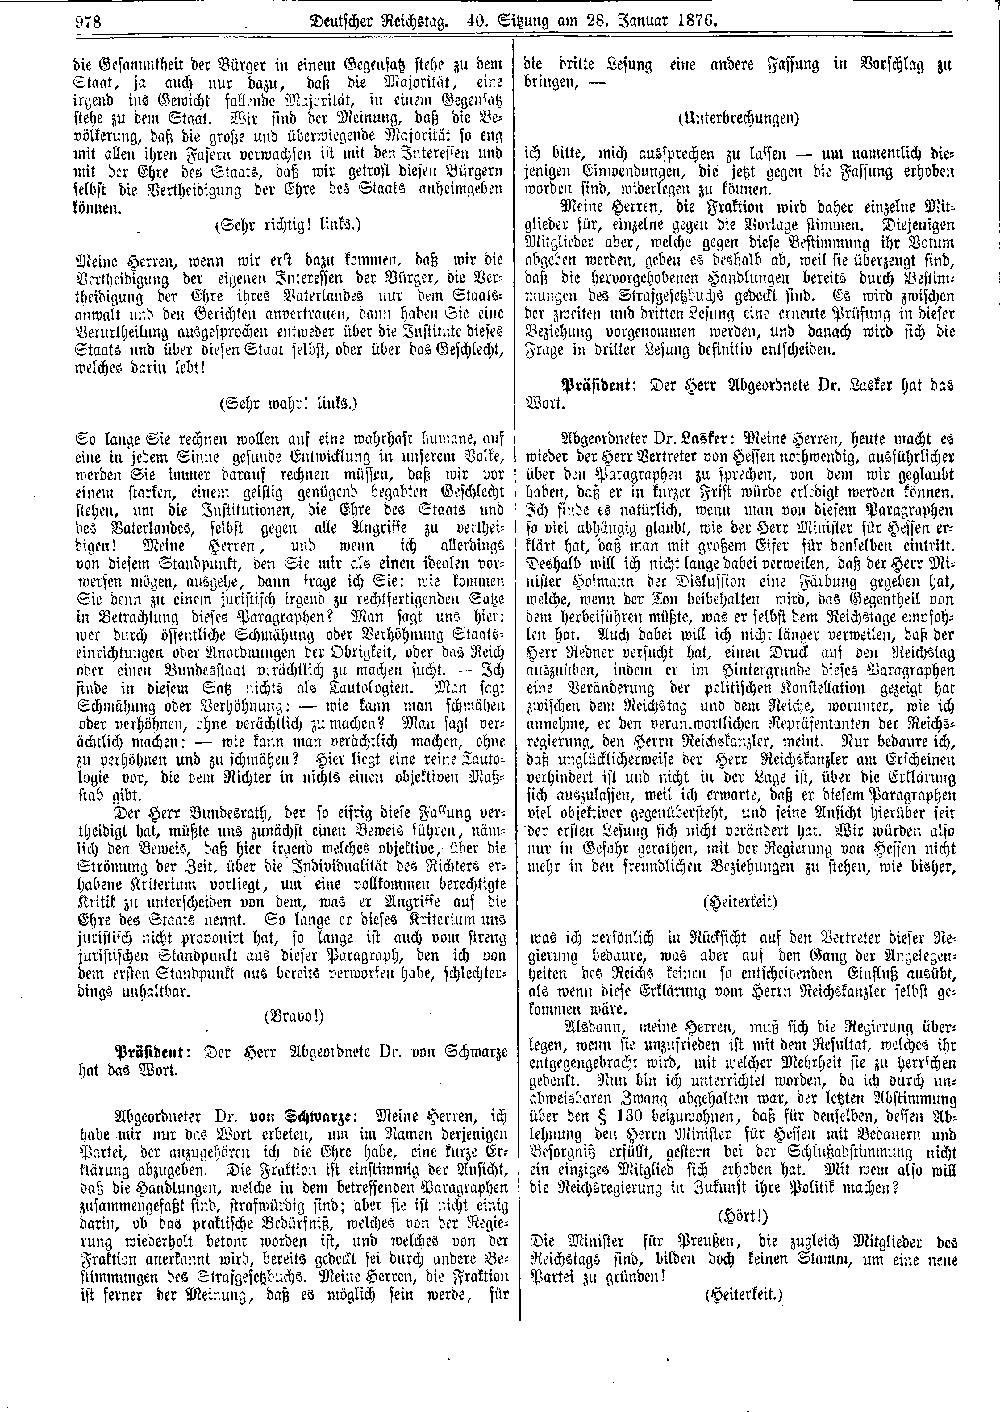 Scan of page 978